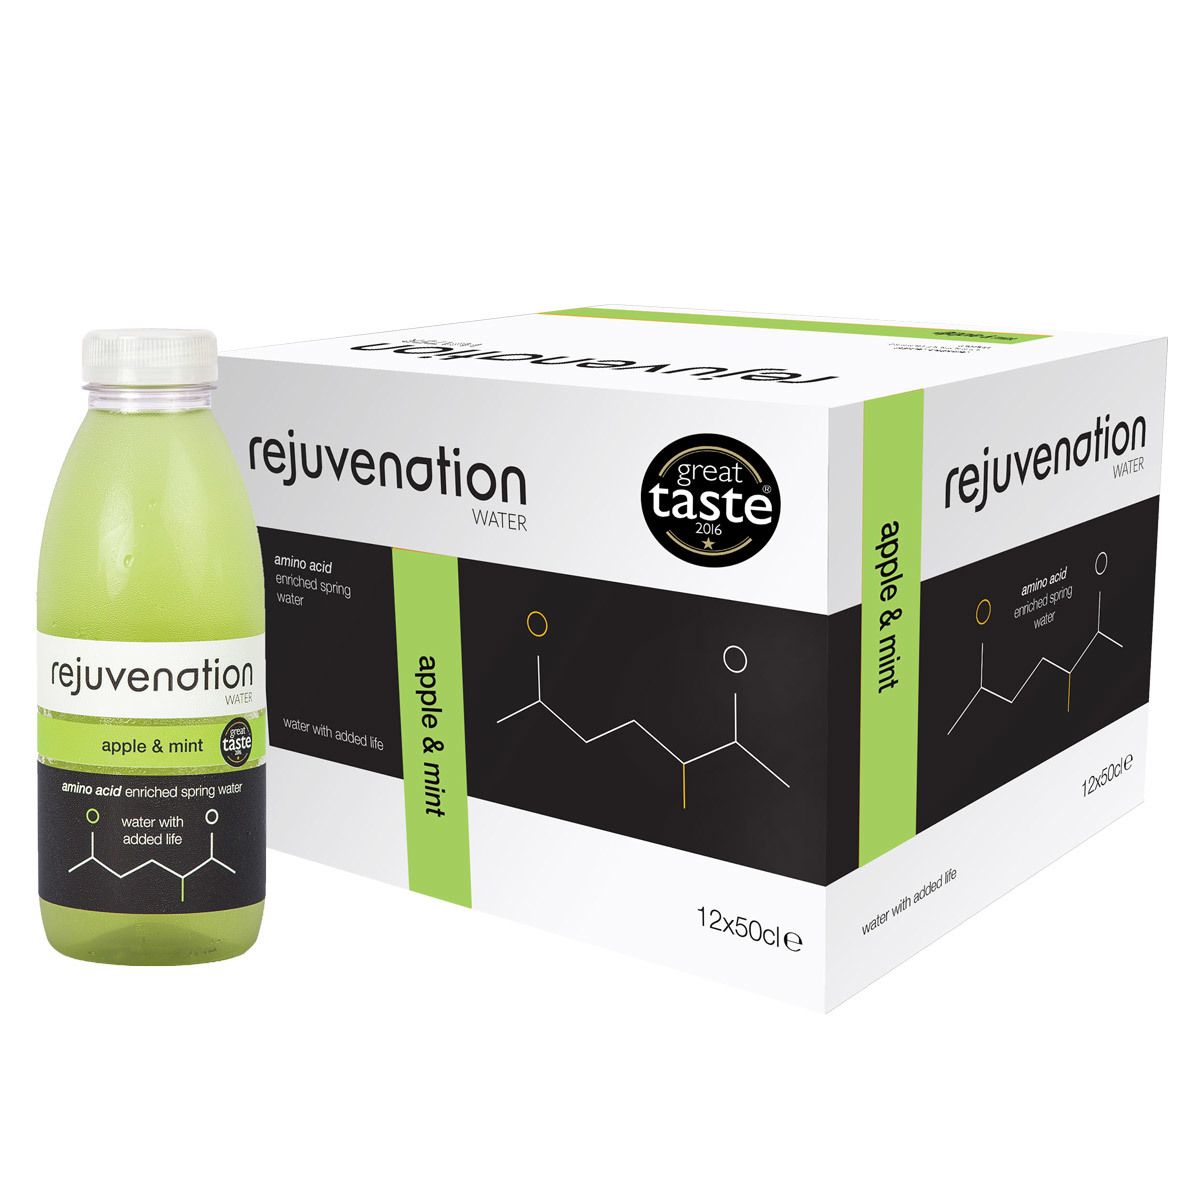 Rejuvenation Water Apple & Mint Amino Acid Enriched Spring Water, 12 x 500ml